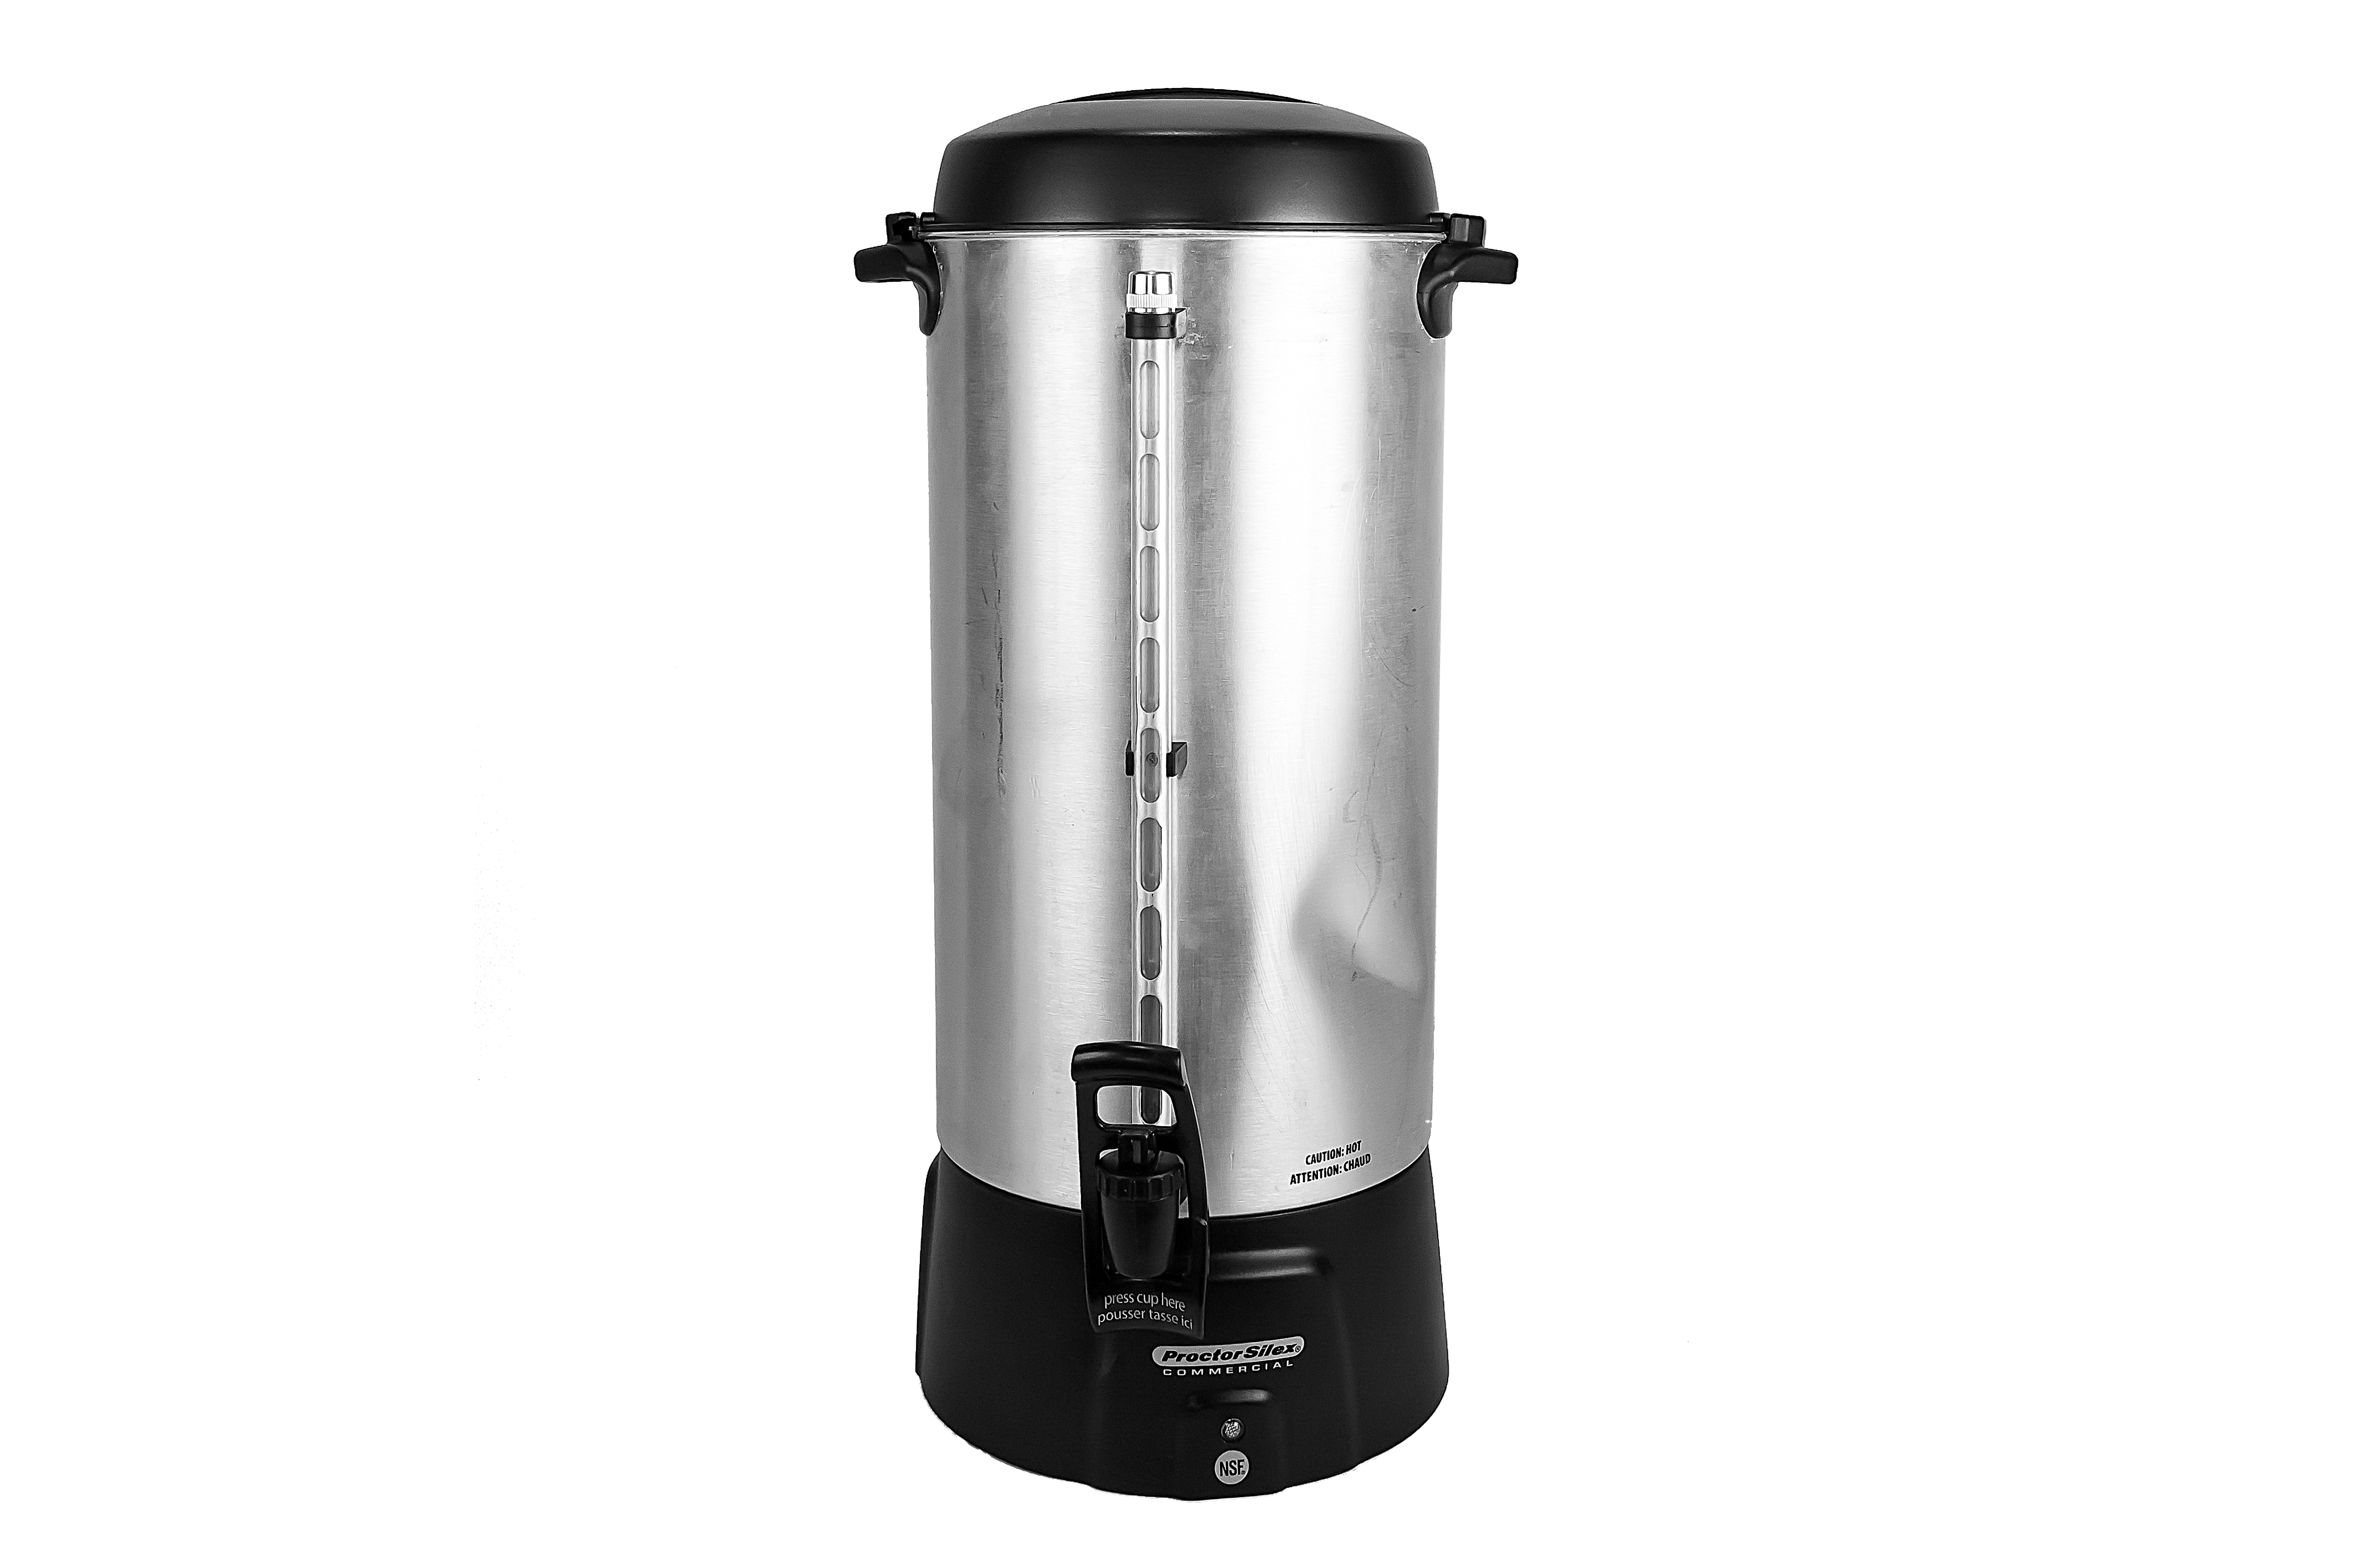 Rent a 42 cup percolator for your party at All Seasons Rent All